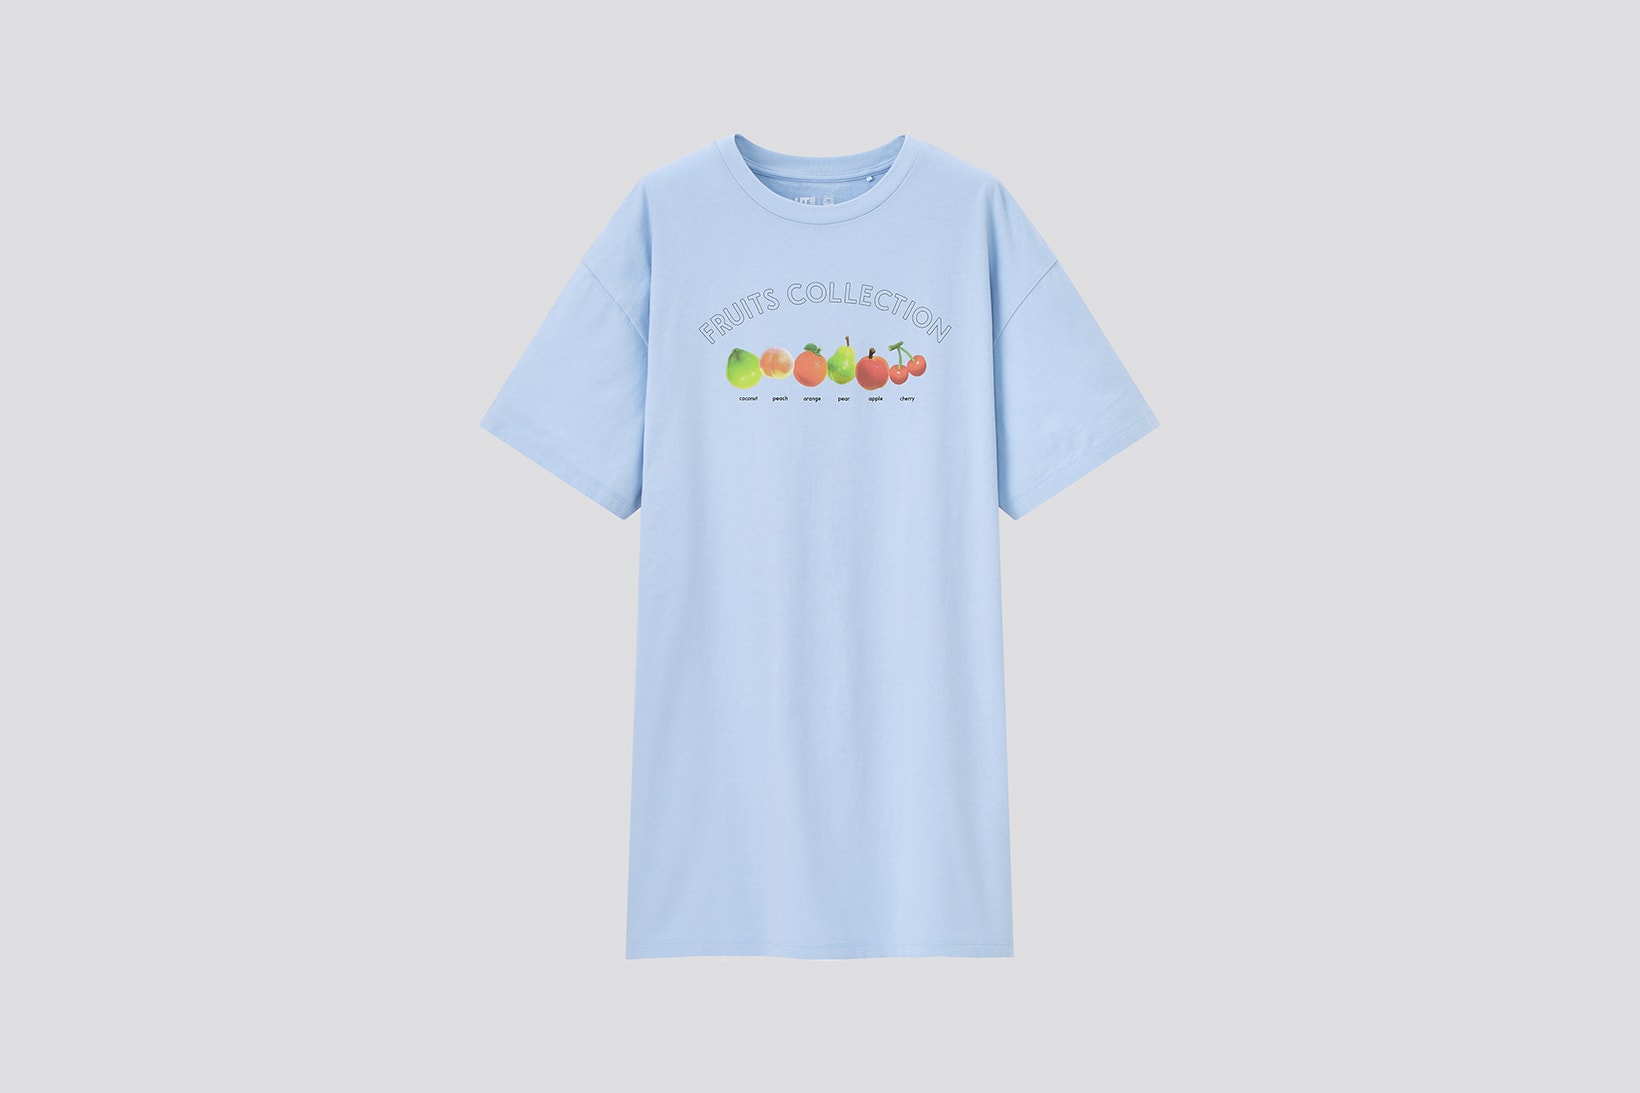 Animal Crossing x UNIQLO UT Collaboration Collection T-Shirt